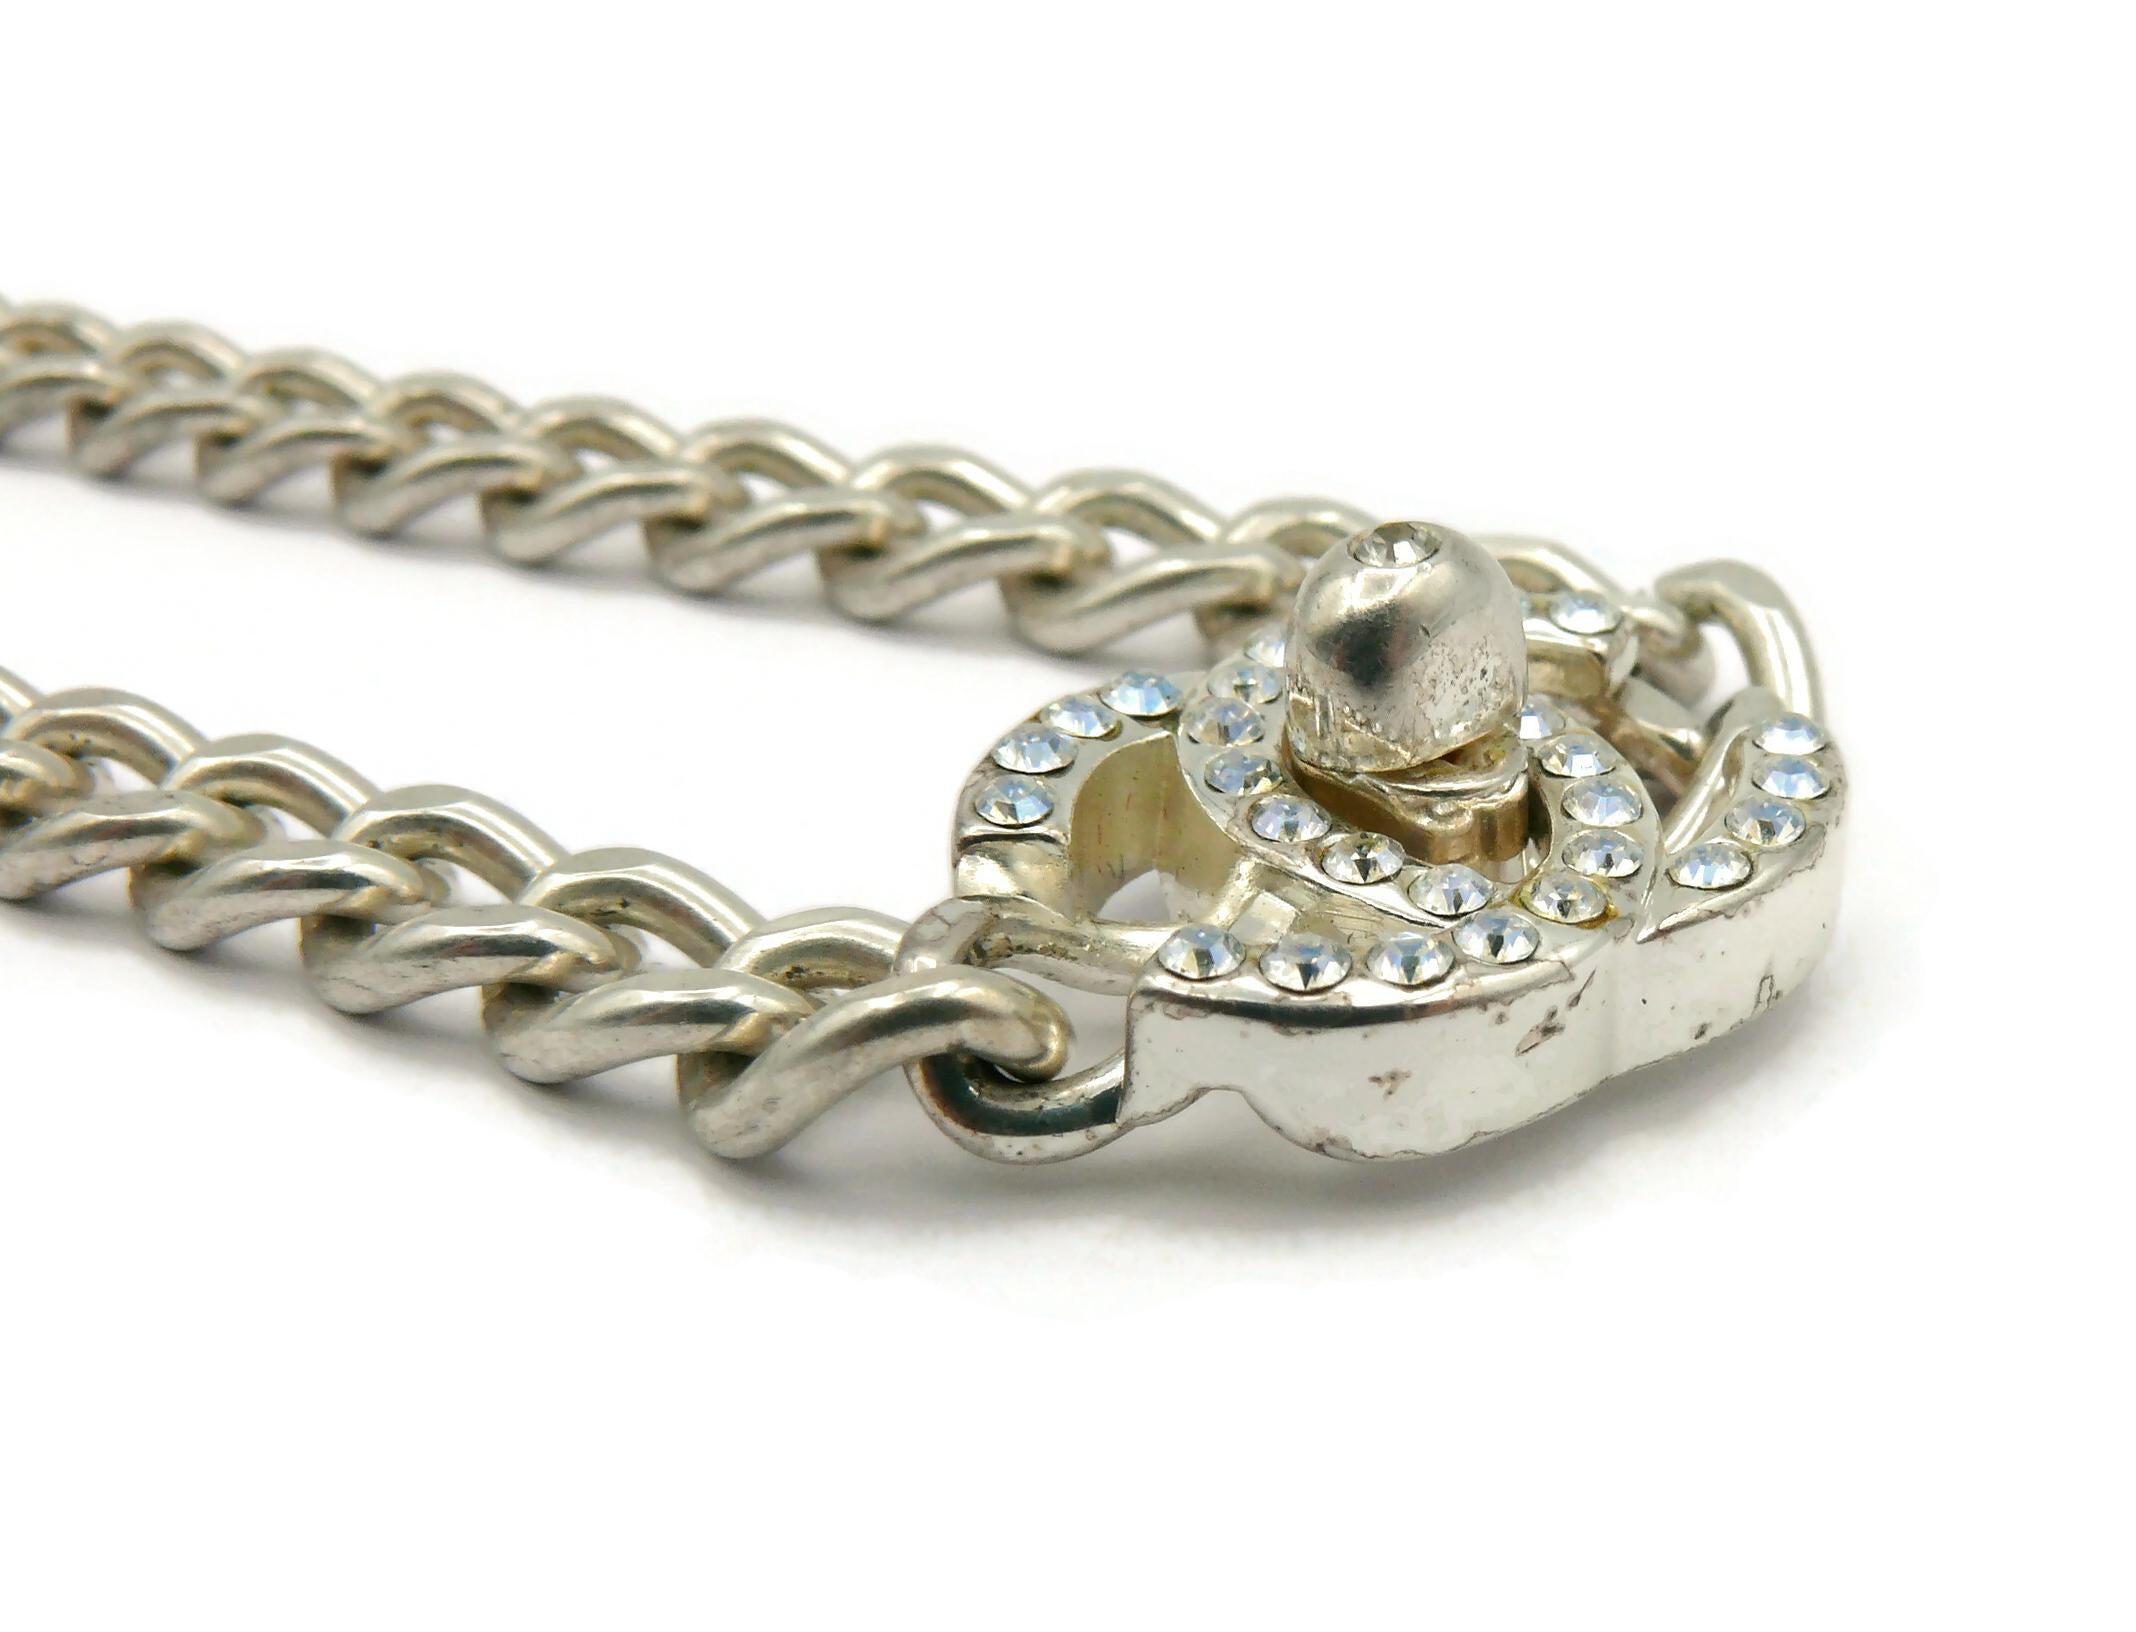 CHANEL by KARL LAGERFELD Vintage 1996 Silver Tone Jewelled Turn-Lock Necklace For Sale 10